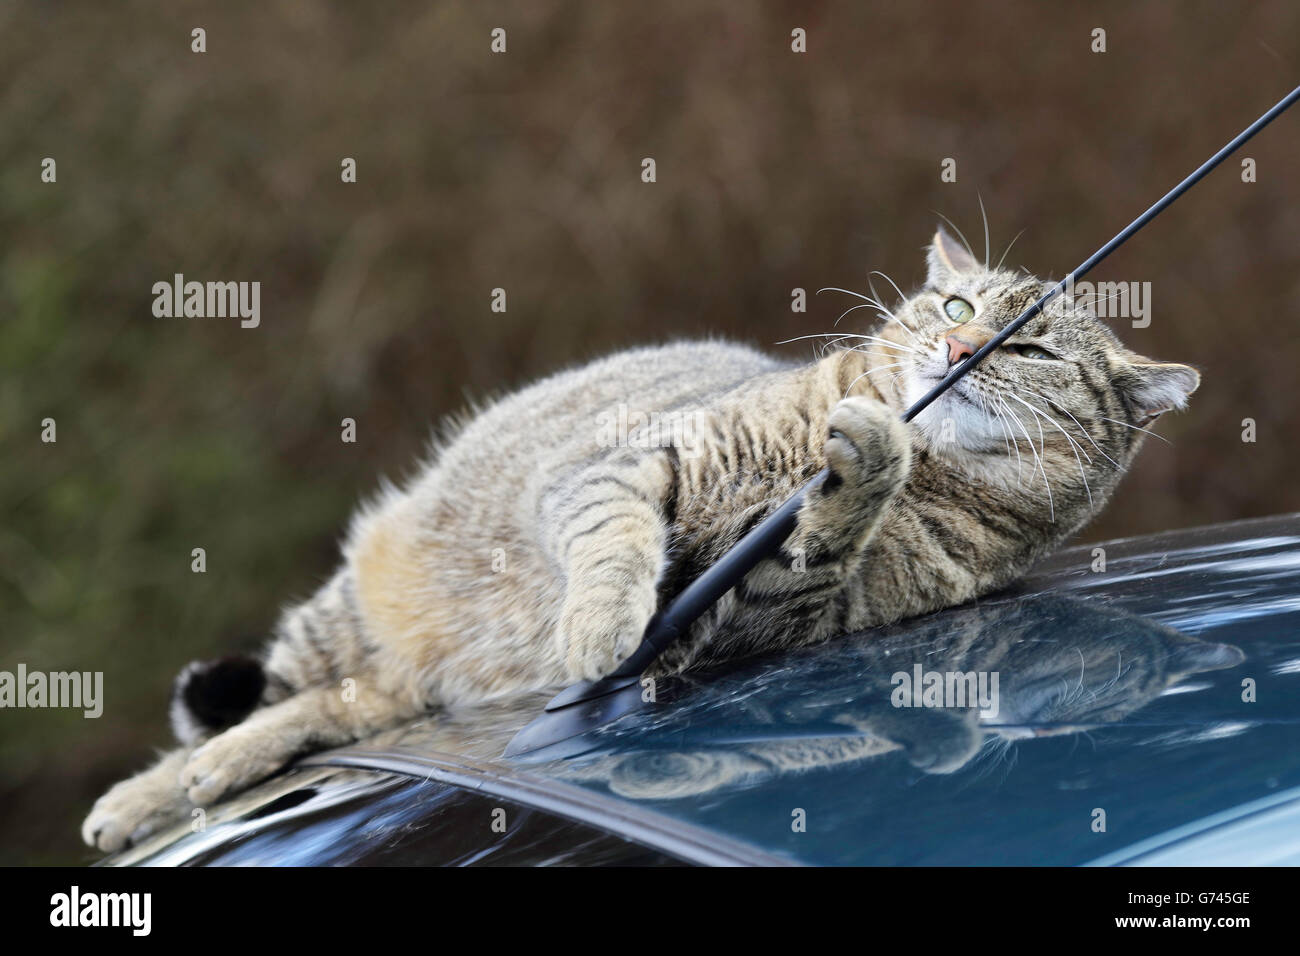 Domestic Cat on car roof, Germany Stock Photo